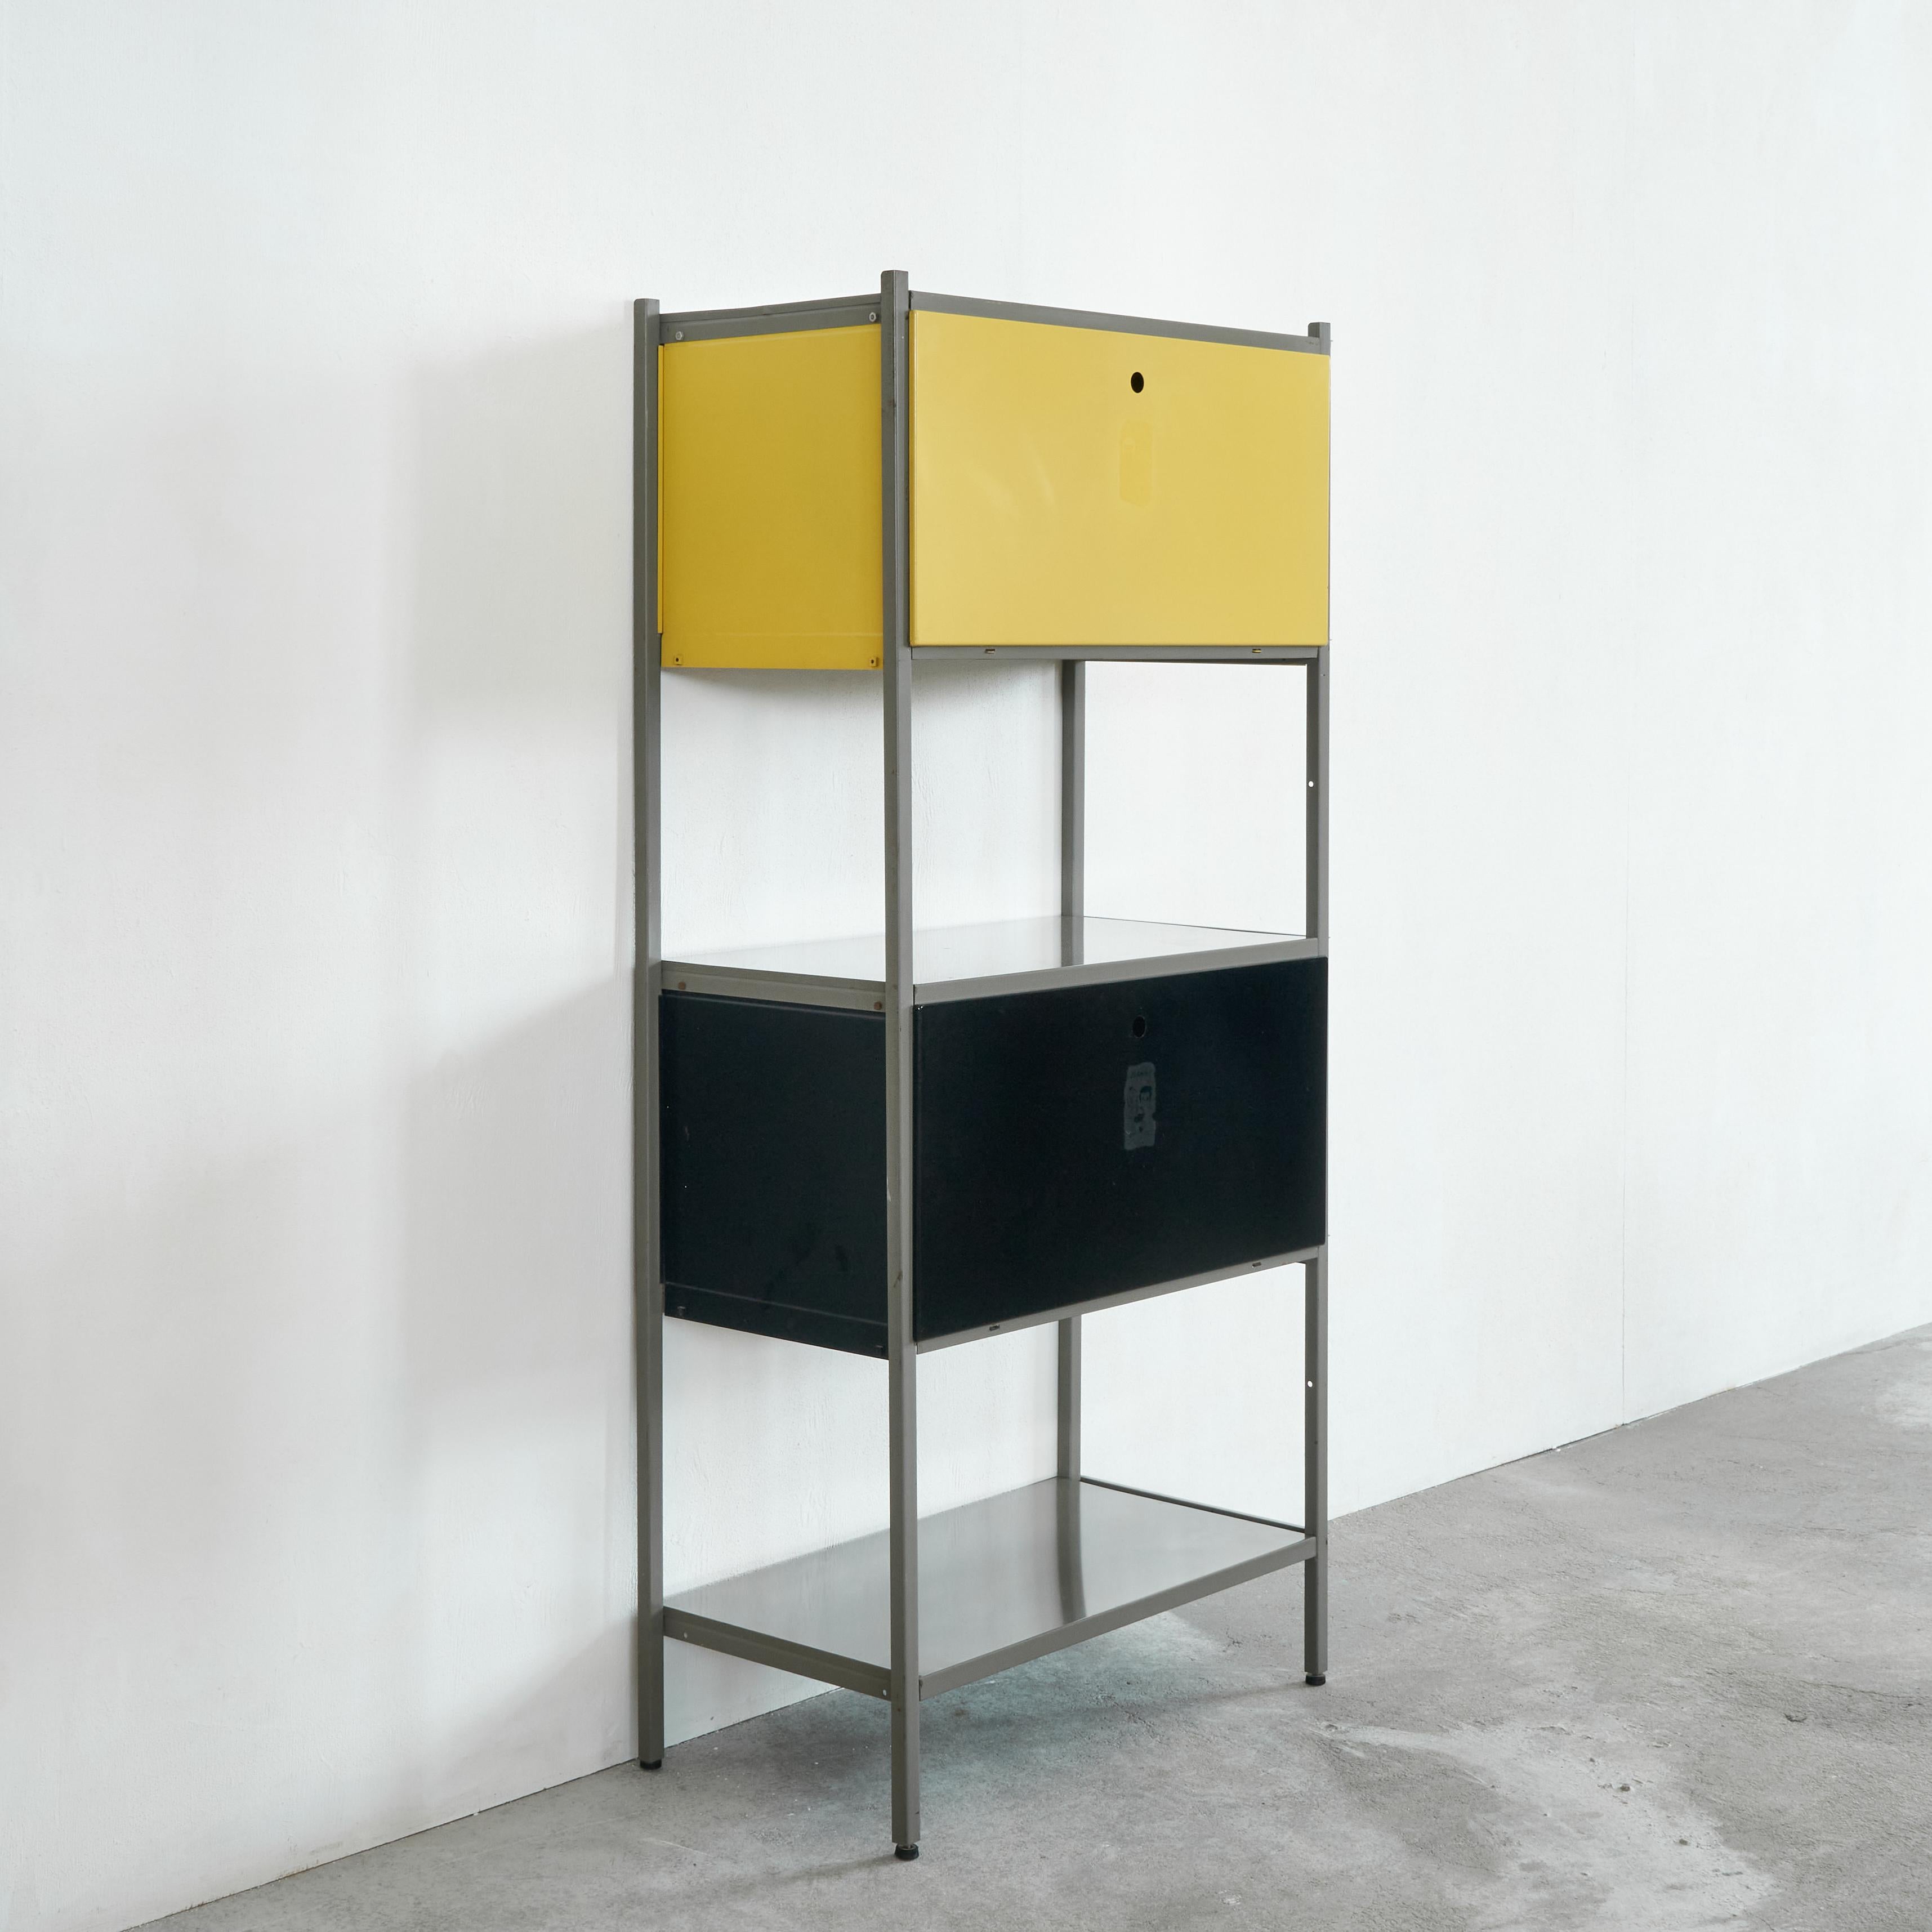 Graphical and stylish cabinet by Wim Rietveld for Gispen, Holland, 1954.

Wim Rietveld, the son of Gerrit Rietveld, designed a series of modular cabinets for Gispen in 1954. They came in various colors, sizes and combinations. 

Our black and